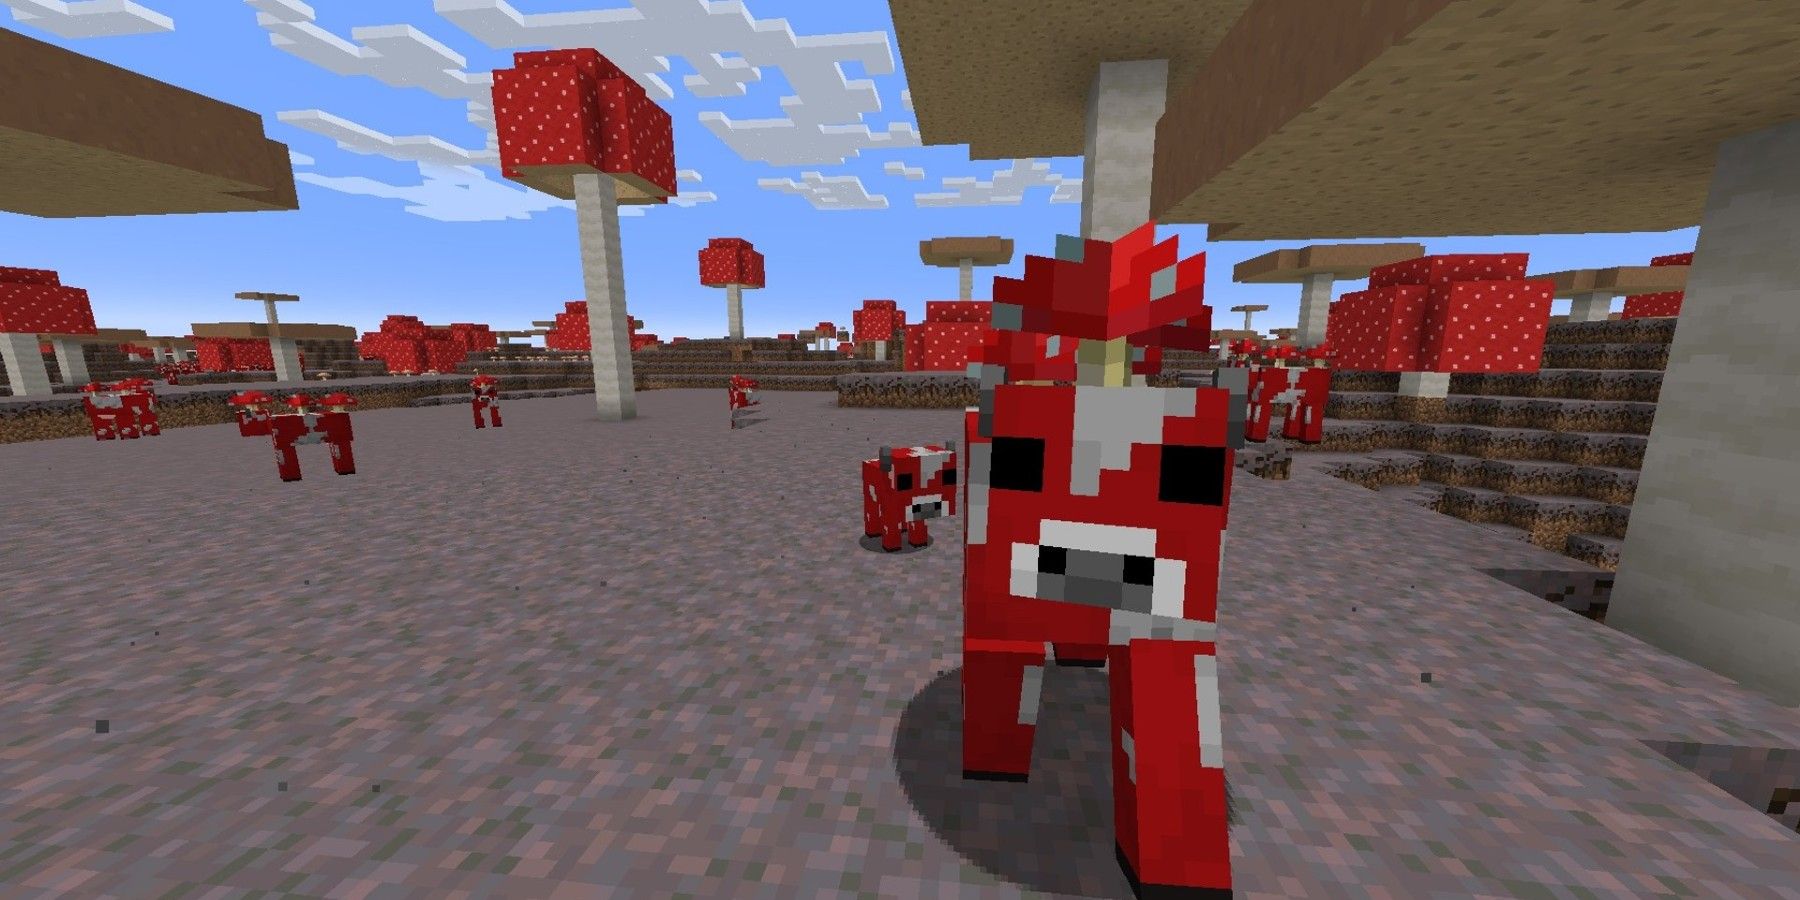 Minecraft Fan Creates Incredible Picture of a Mooshroom From the Game